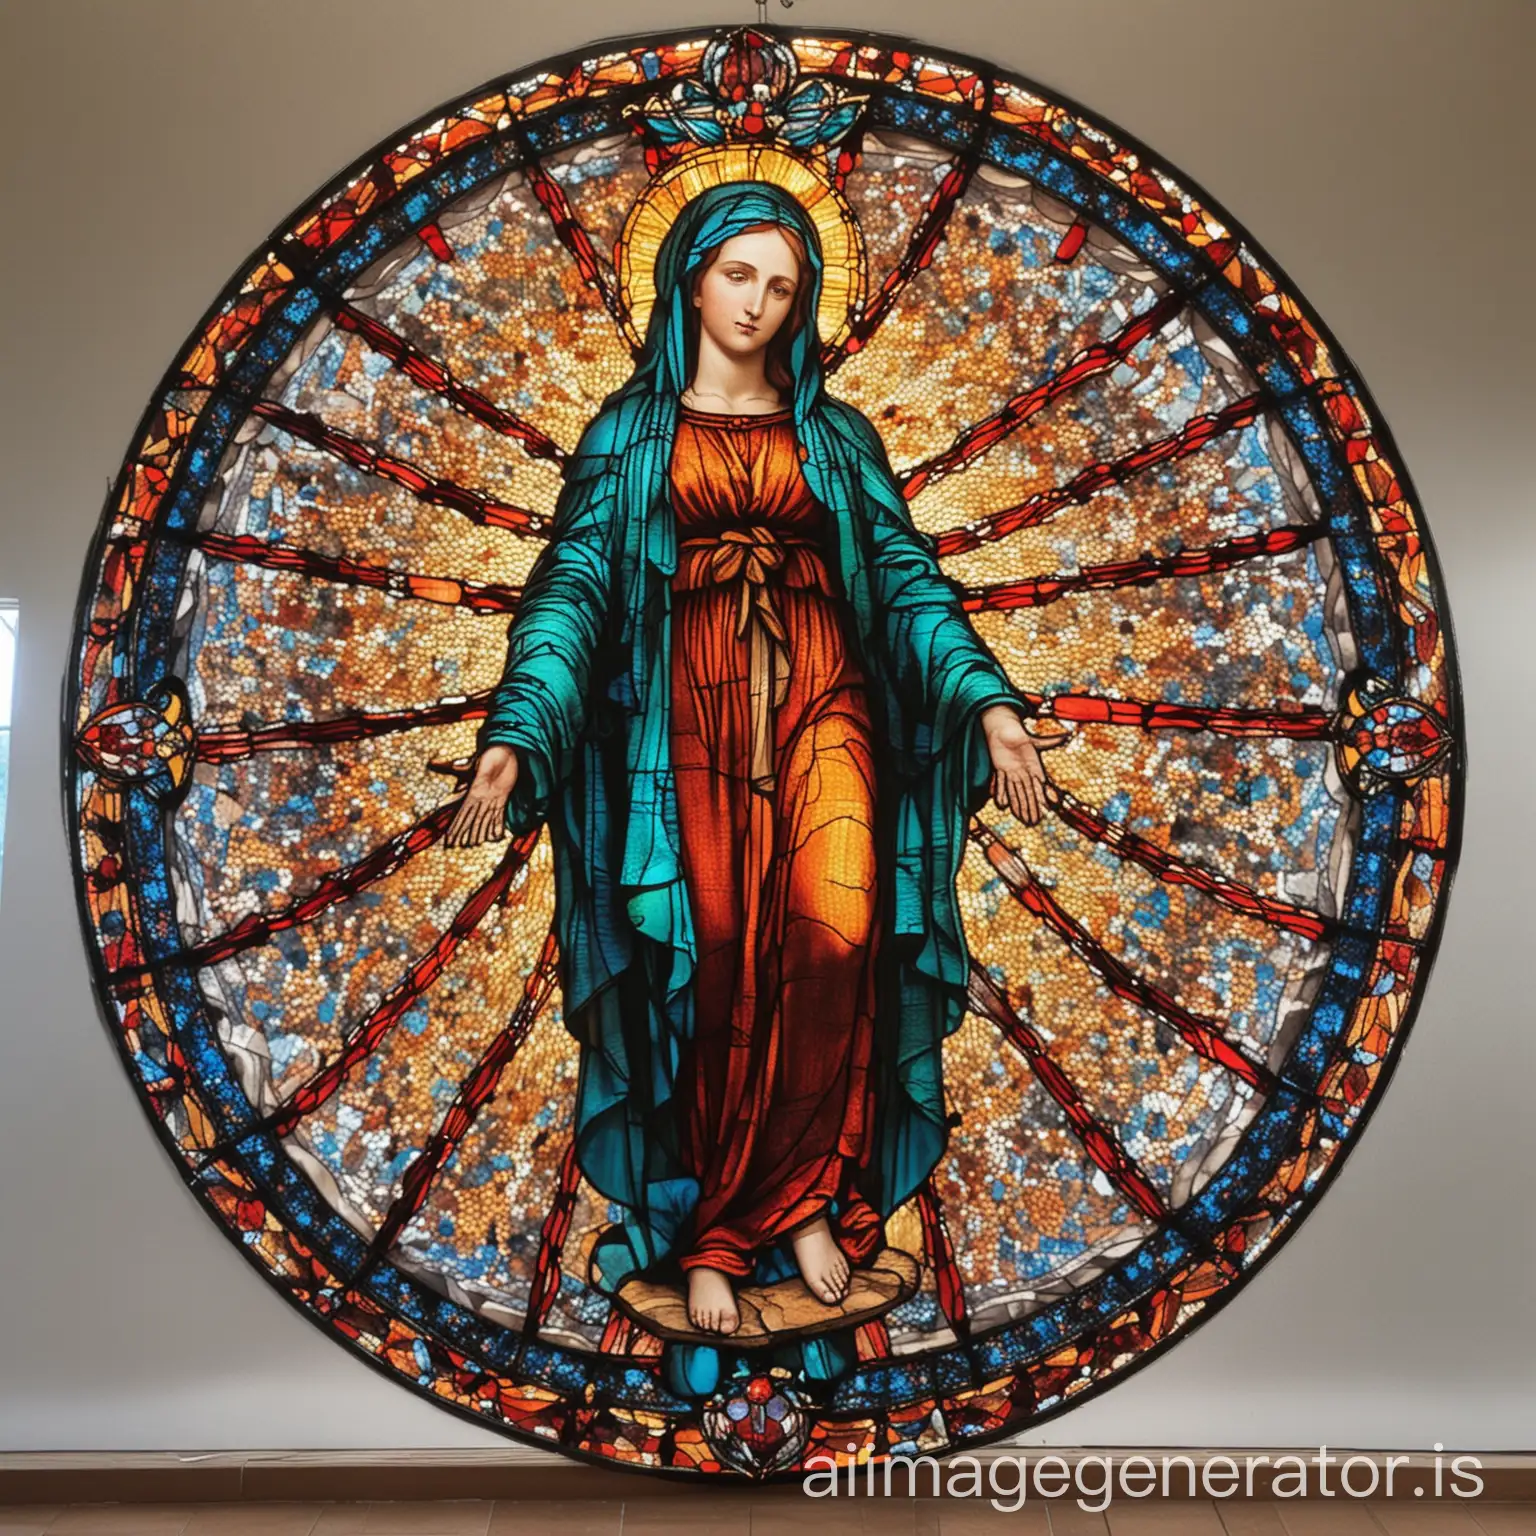 Colorful-Stained-Glass-Portrait-of-the-Virgin-Mary